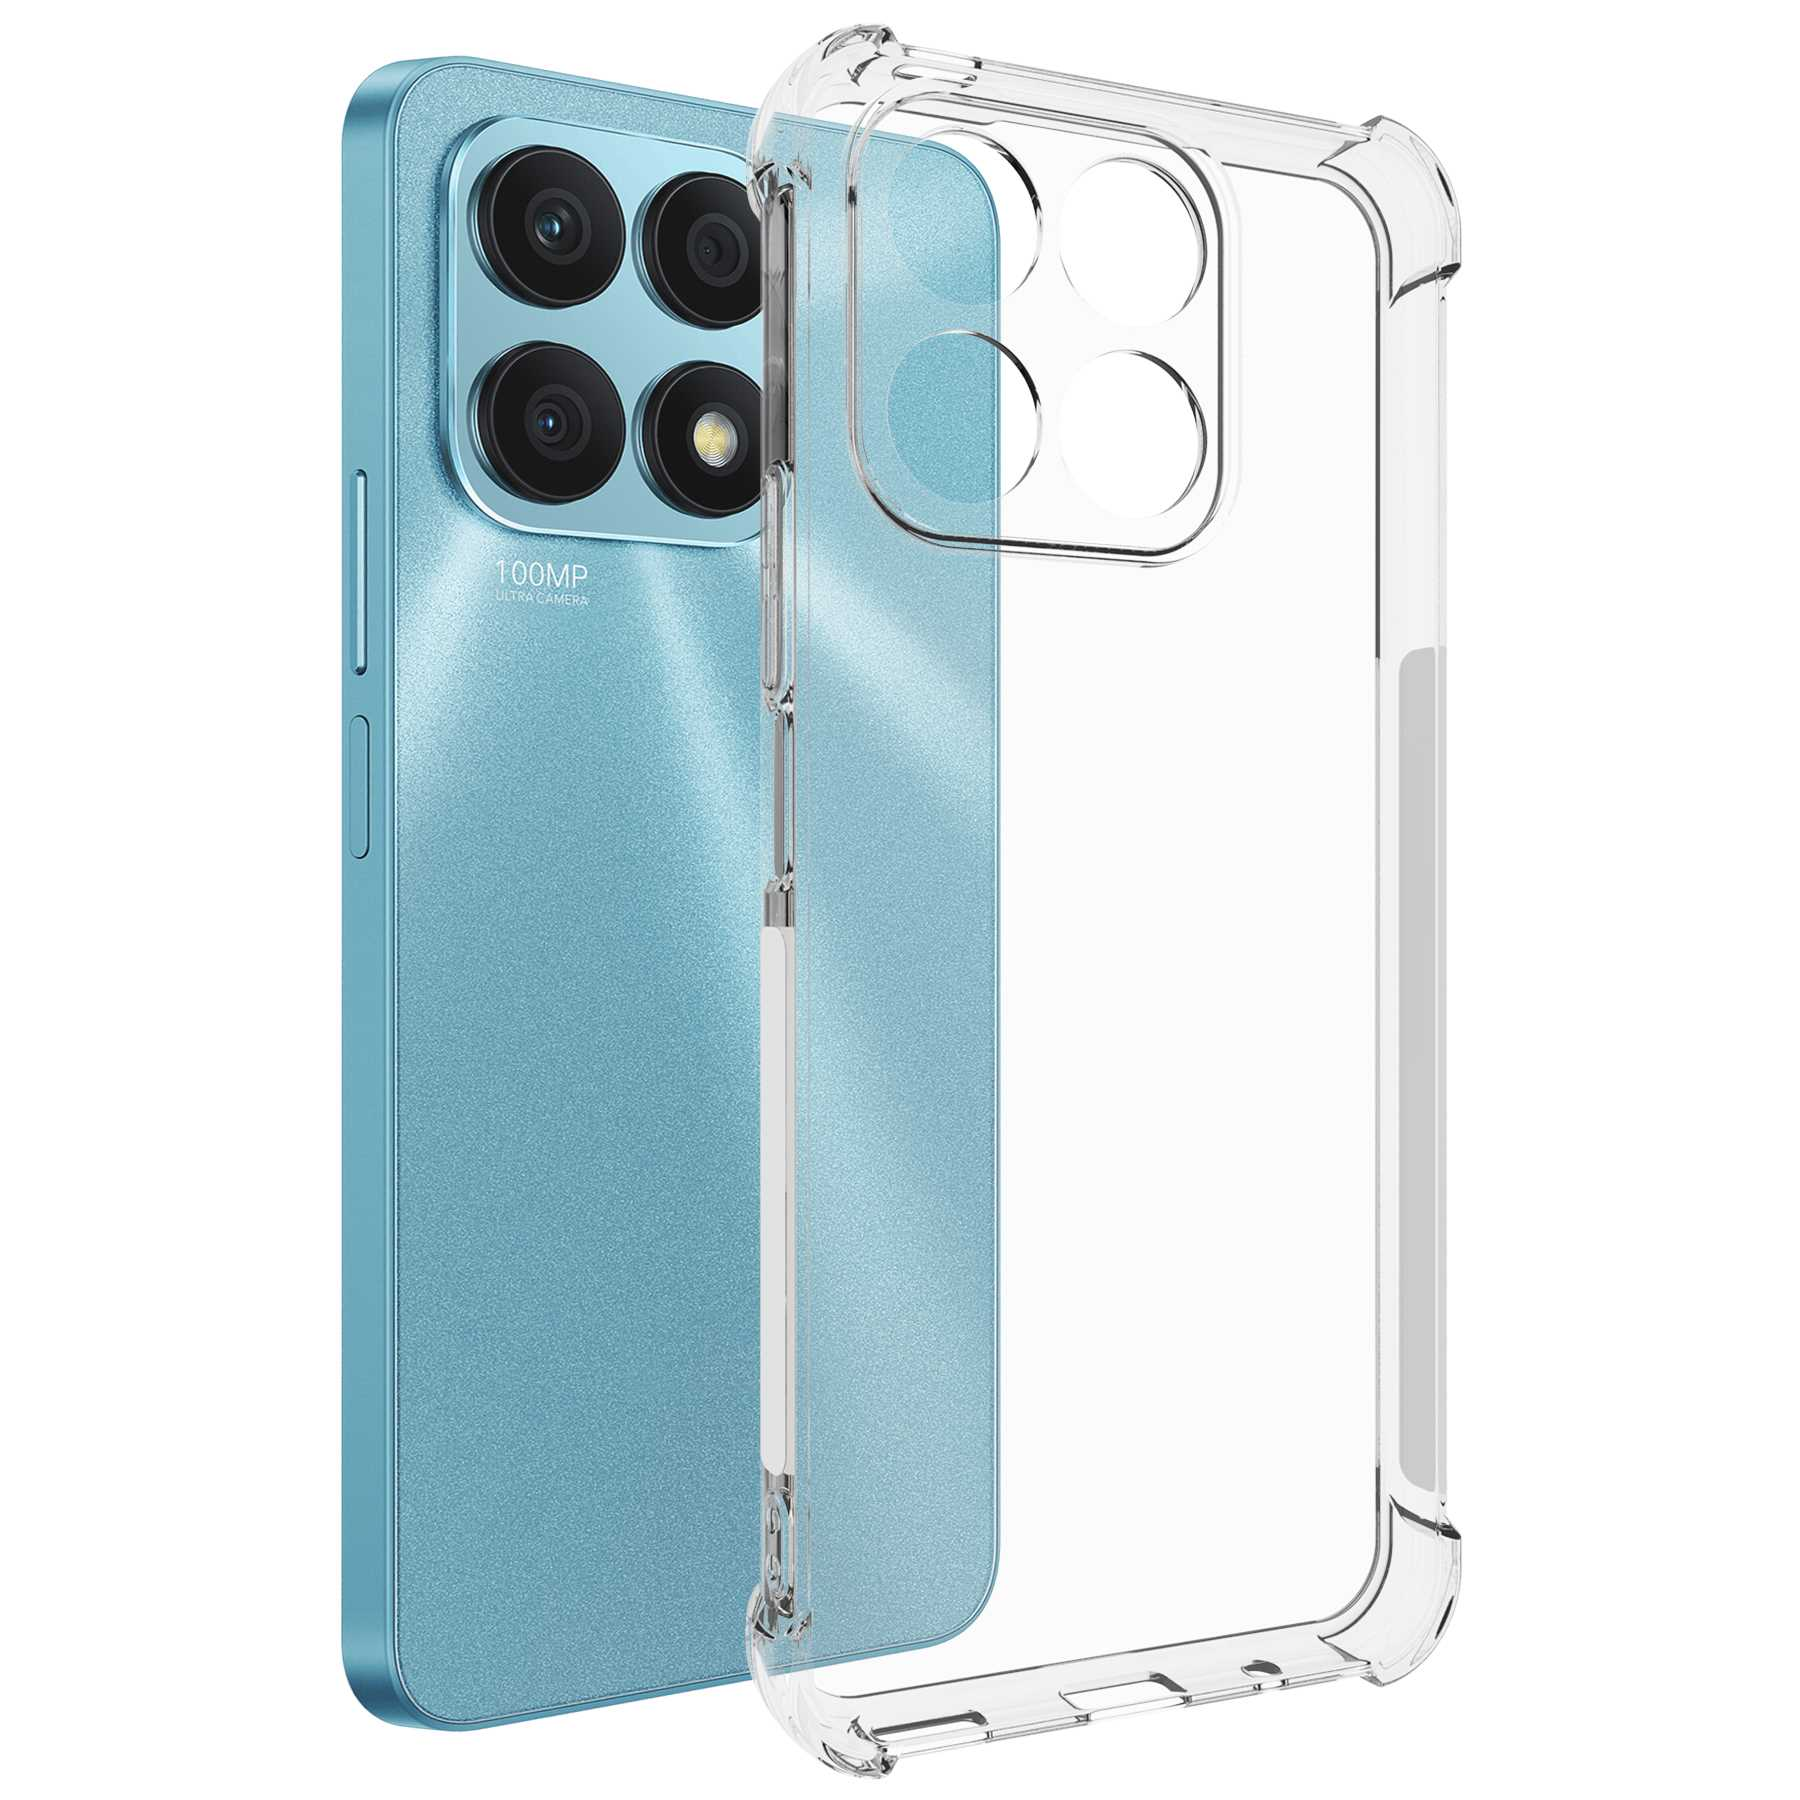 MTB MORE ENERGY Case, Honor, Transparent Clear Armor X8A, Backcover